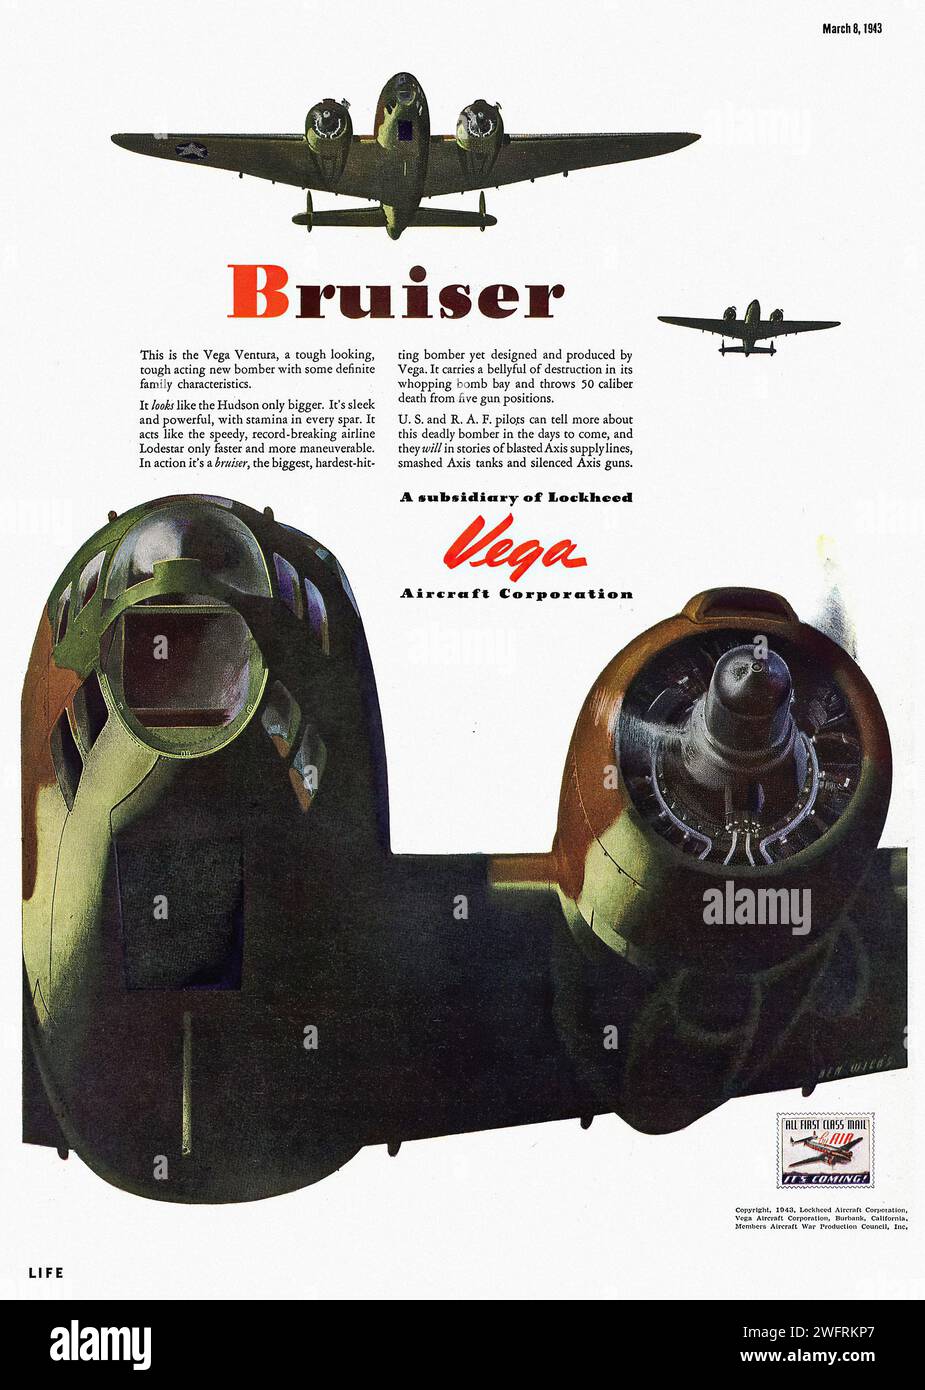 “This is the Vega Ventura, a rough looking bomber designed and produced by Lockheed Aircraft Corporation. A subsidiary of Lockheed Aircraft Corporation.”  Vintage advertisement for the Vega Ventura bomber designed and produced by Lockheed Aircraft Corporation during World War II. The advertisement features a large image of the bomber in the center, with smaller images of the bomber in flight and a close-up of the engine on the right side. The advertisement is in a retro style, with bold text and a green and black color scheme. - American (U.S.) advertising, World War II era Stock Photo